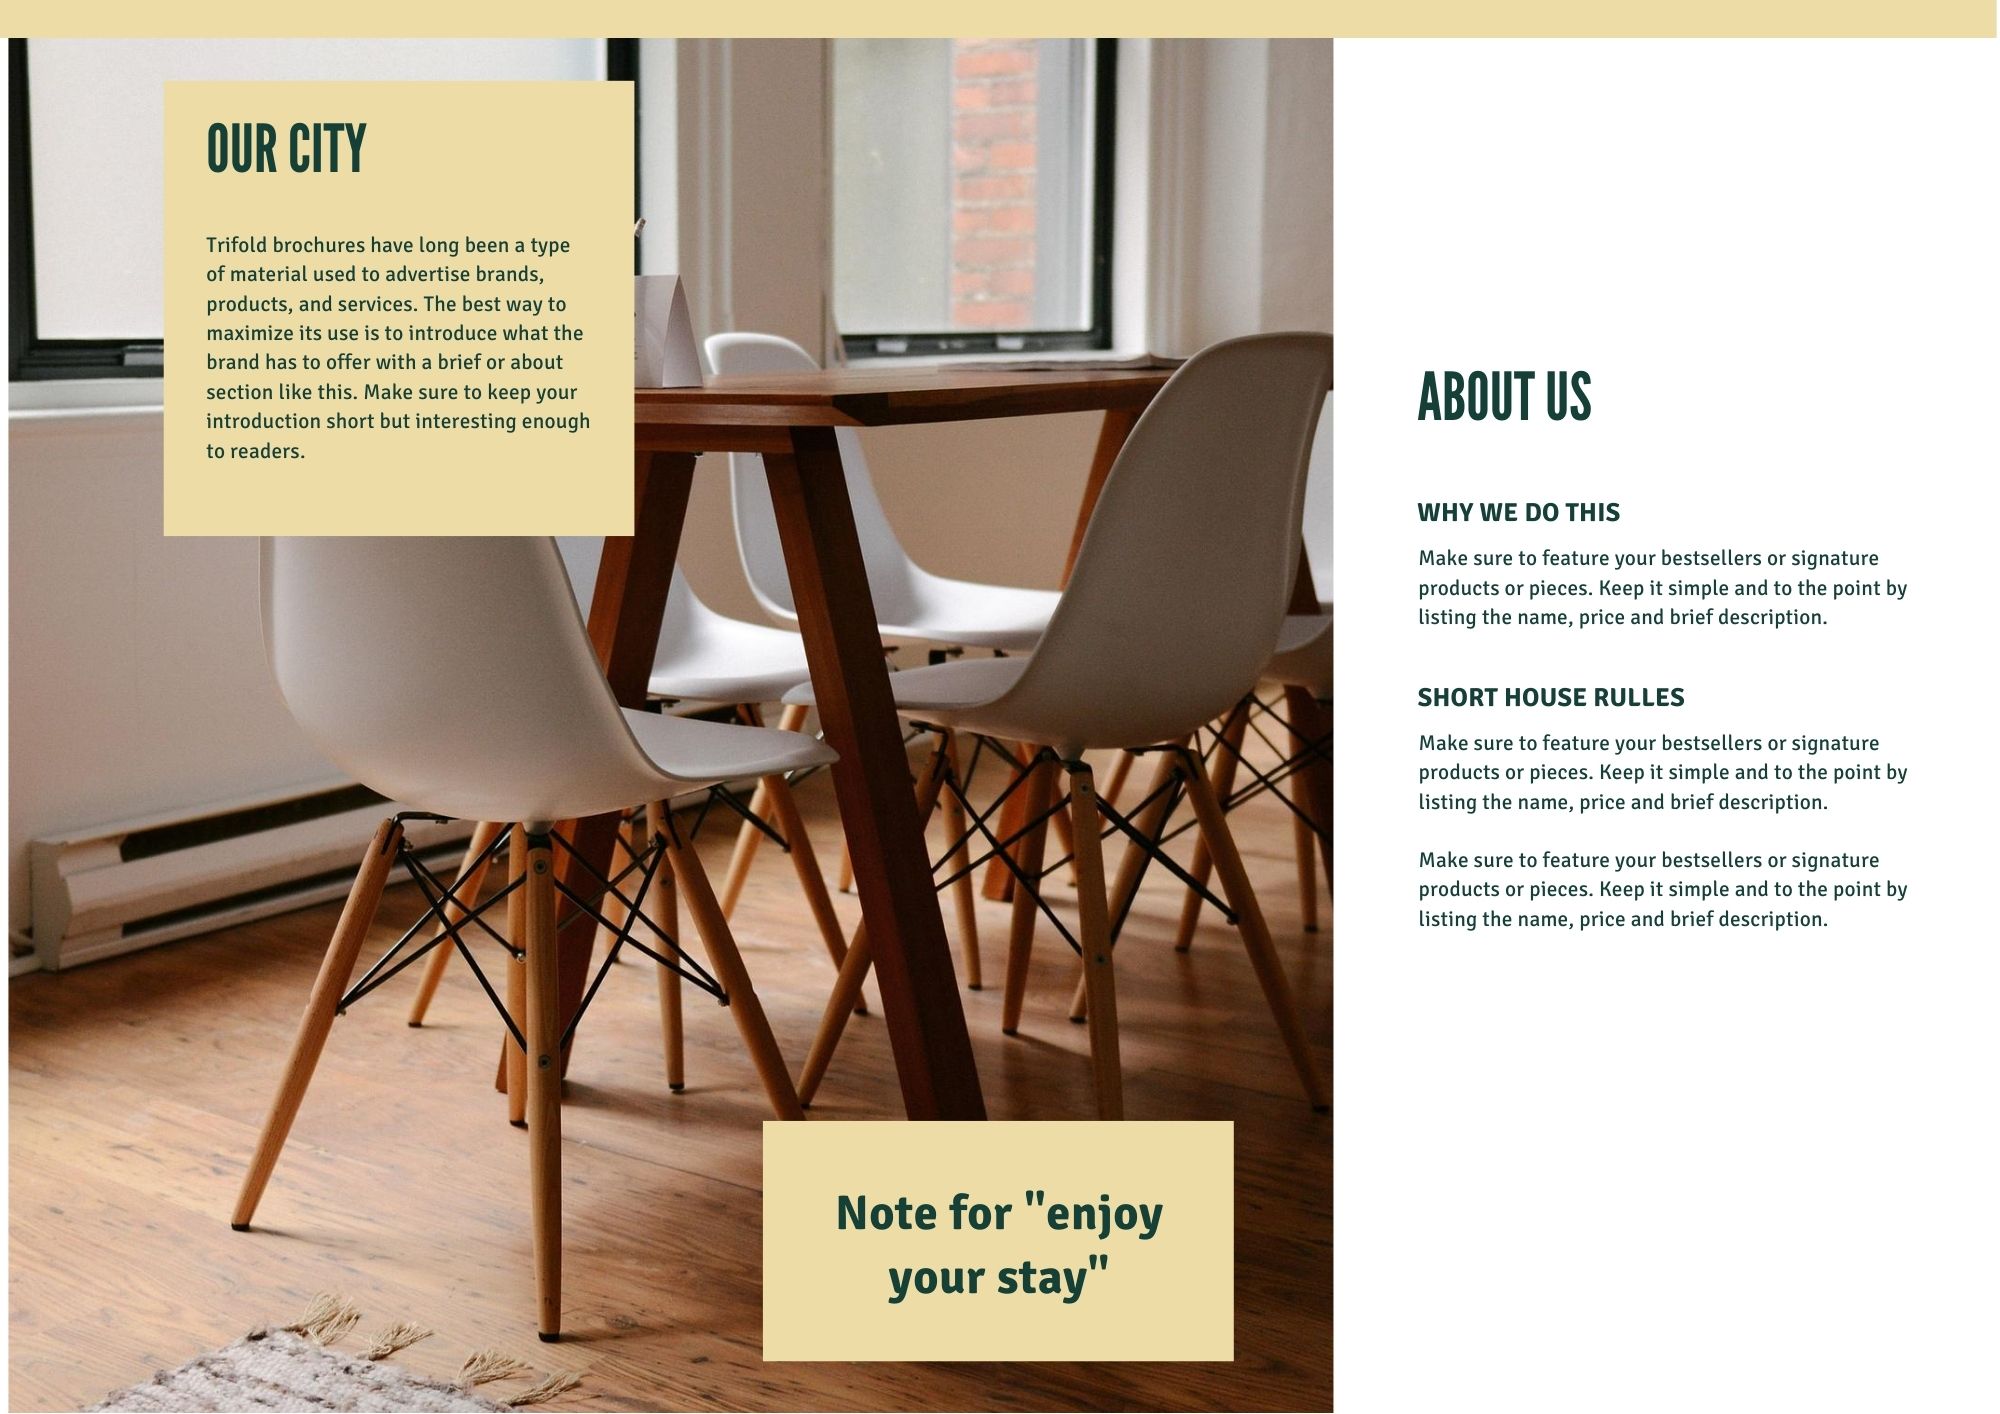 airbnb welcome book template